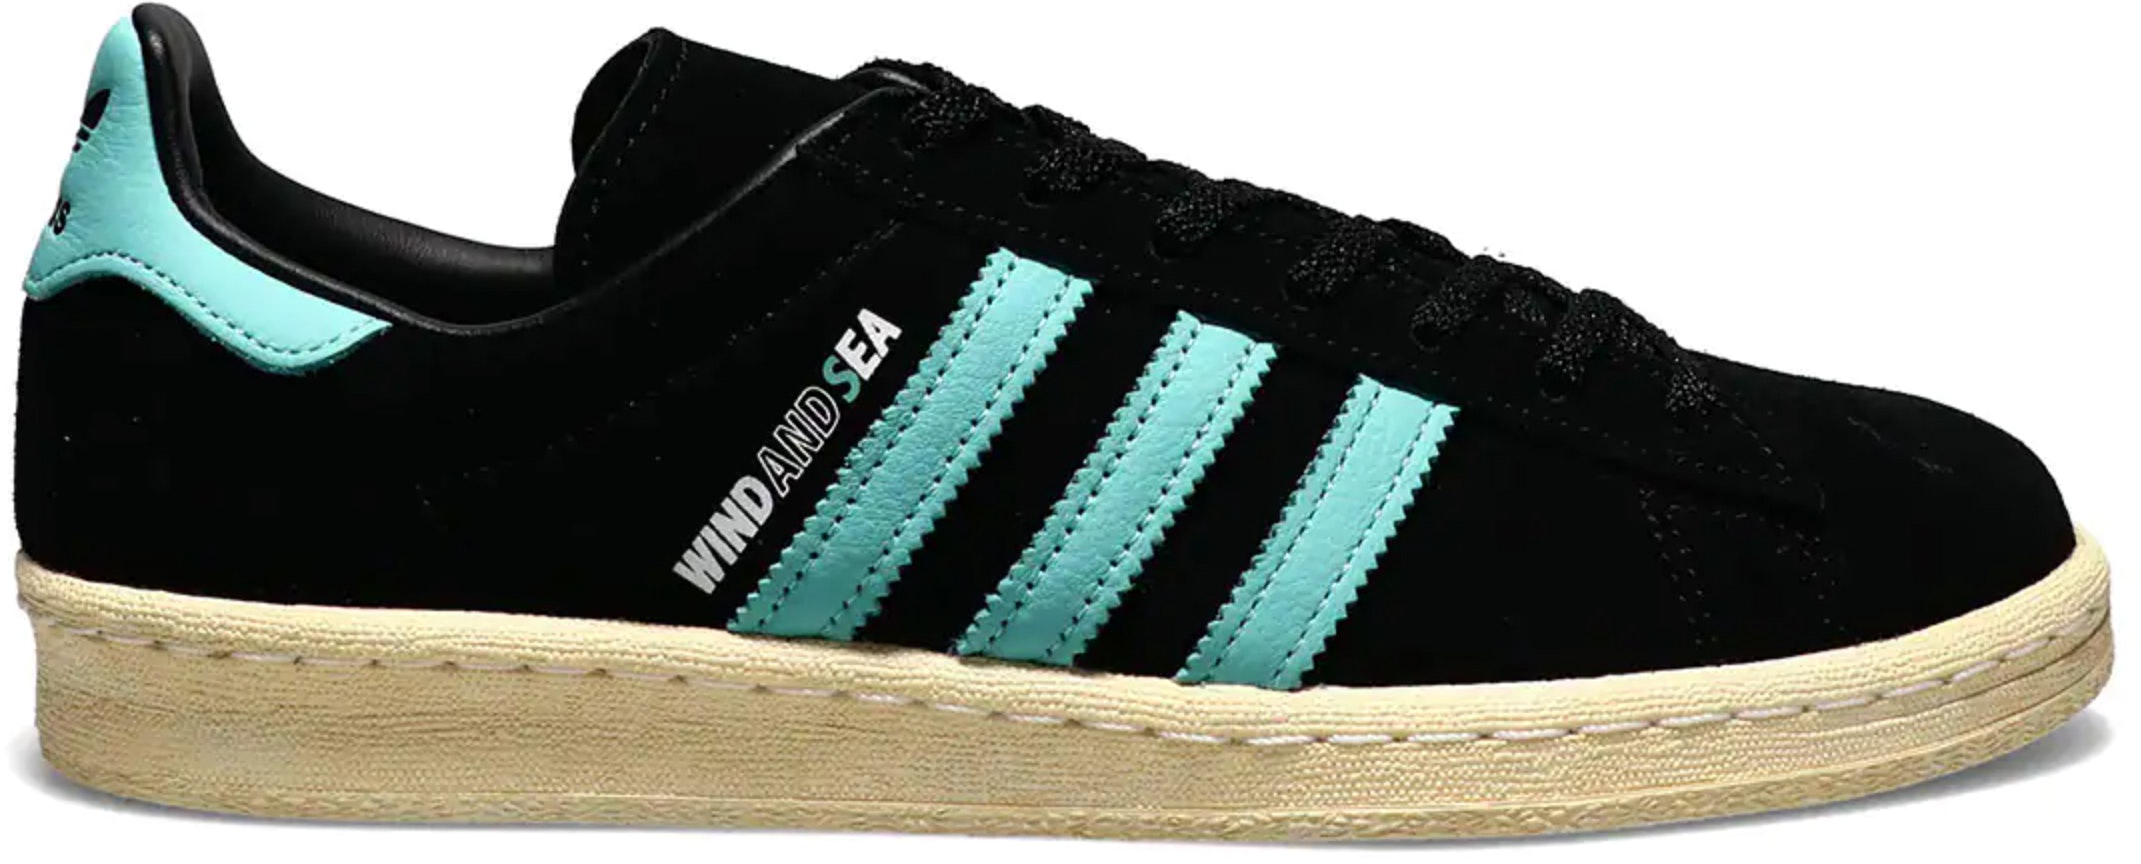 atmos x Wind and Sea x adidas Campus 80s